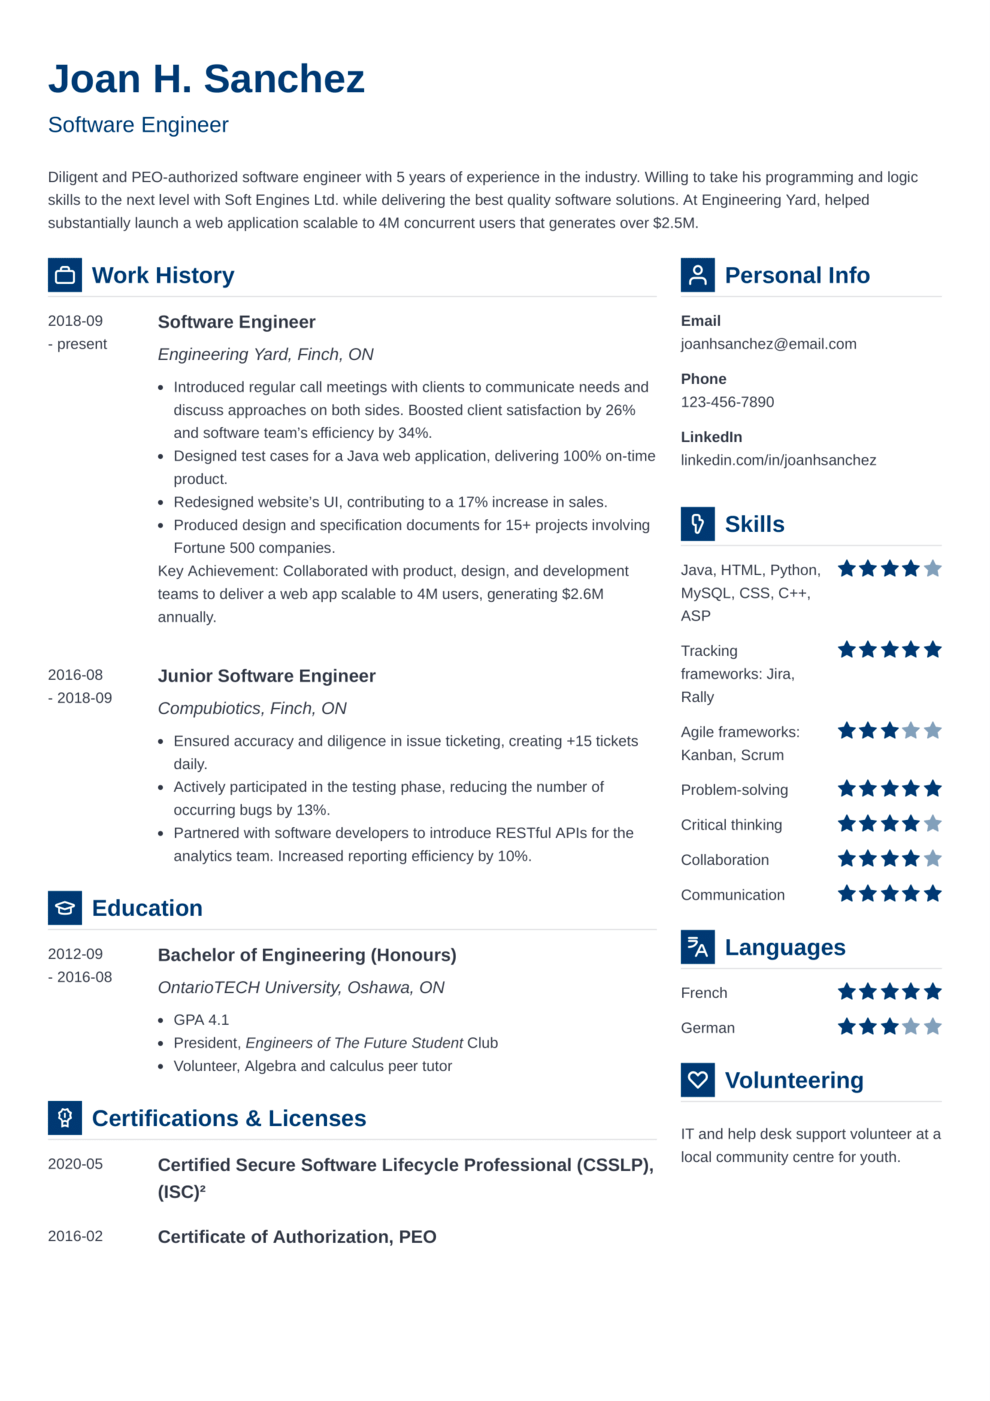 Free Resume Help: 100+ Expert Tips & How-To Guides